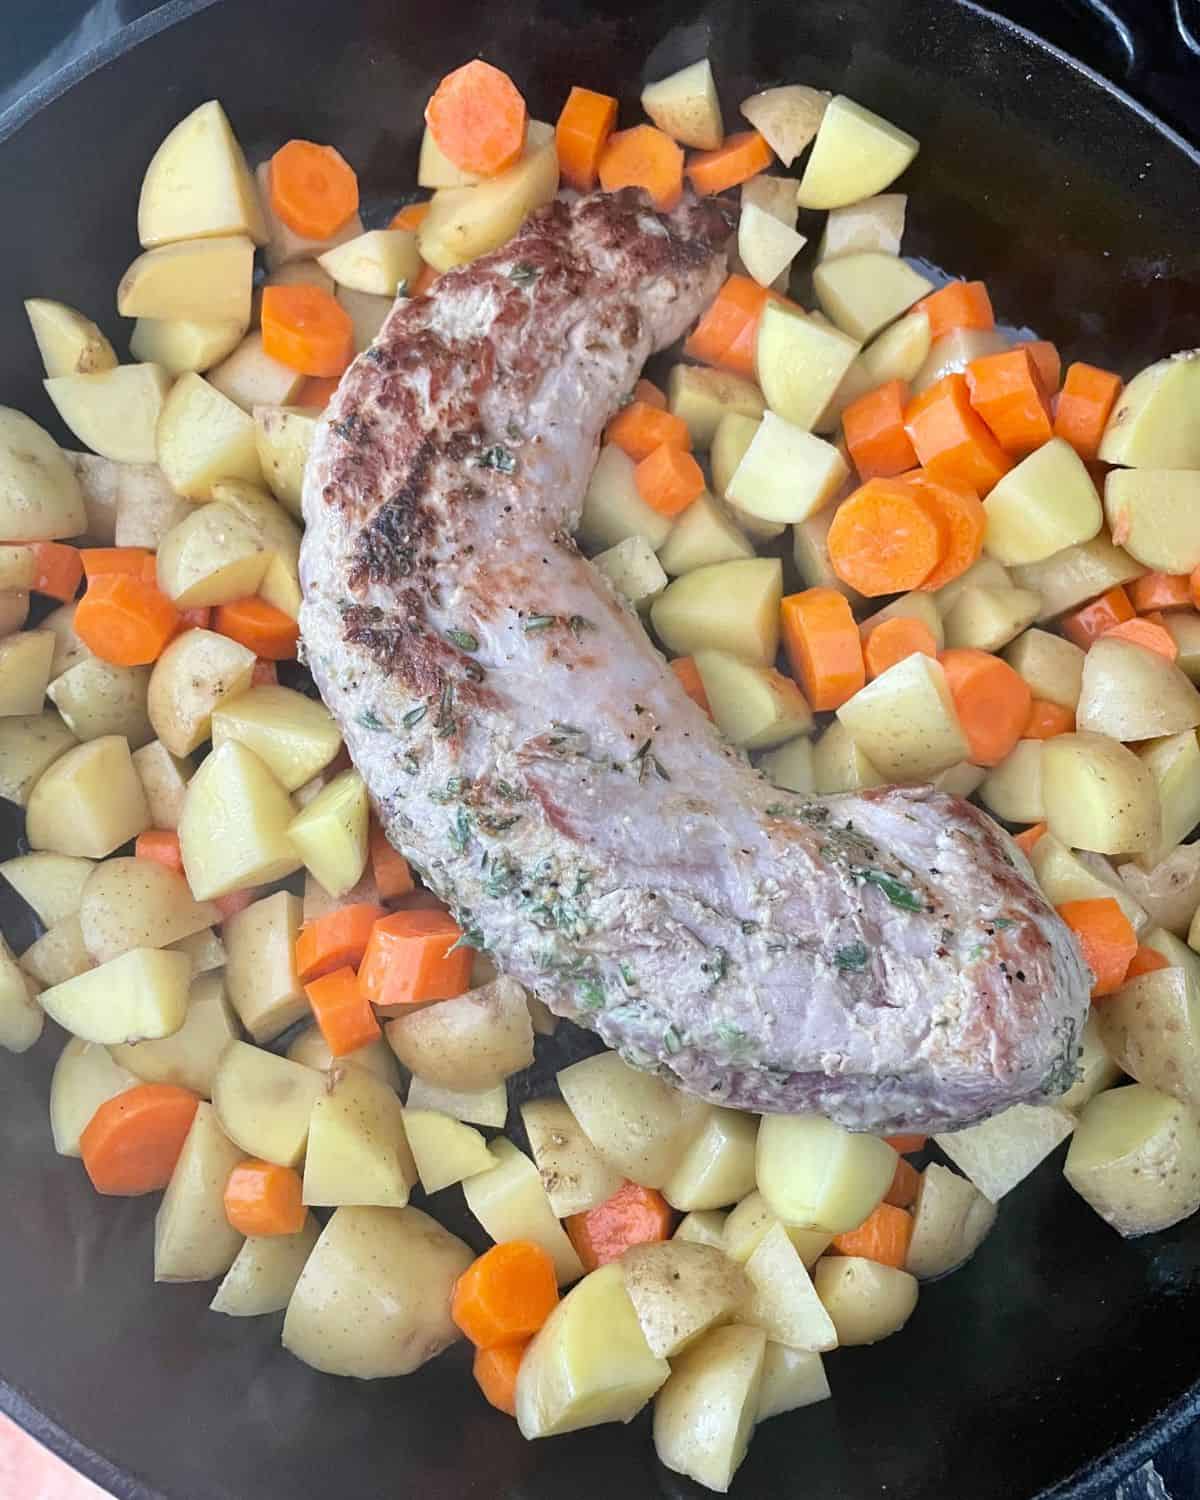 Chopped baby potatoes and carrots added to the cast iron skillet with the pork tenderloin.